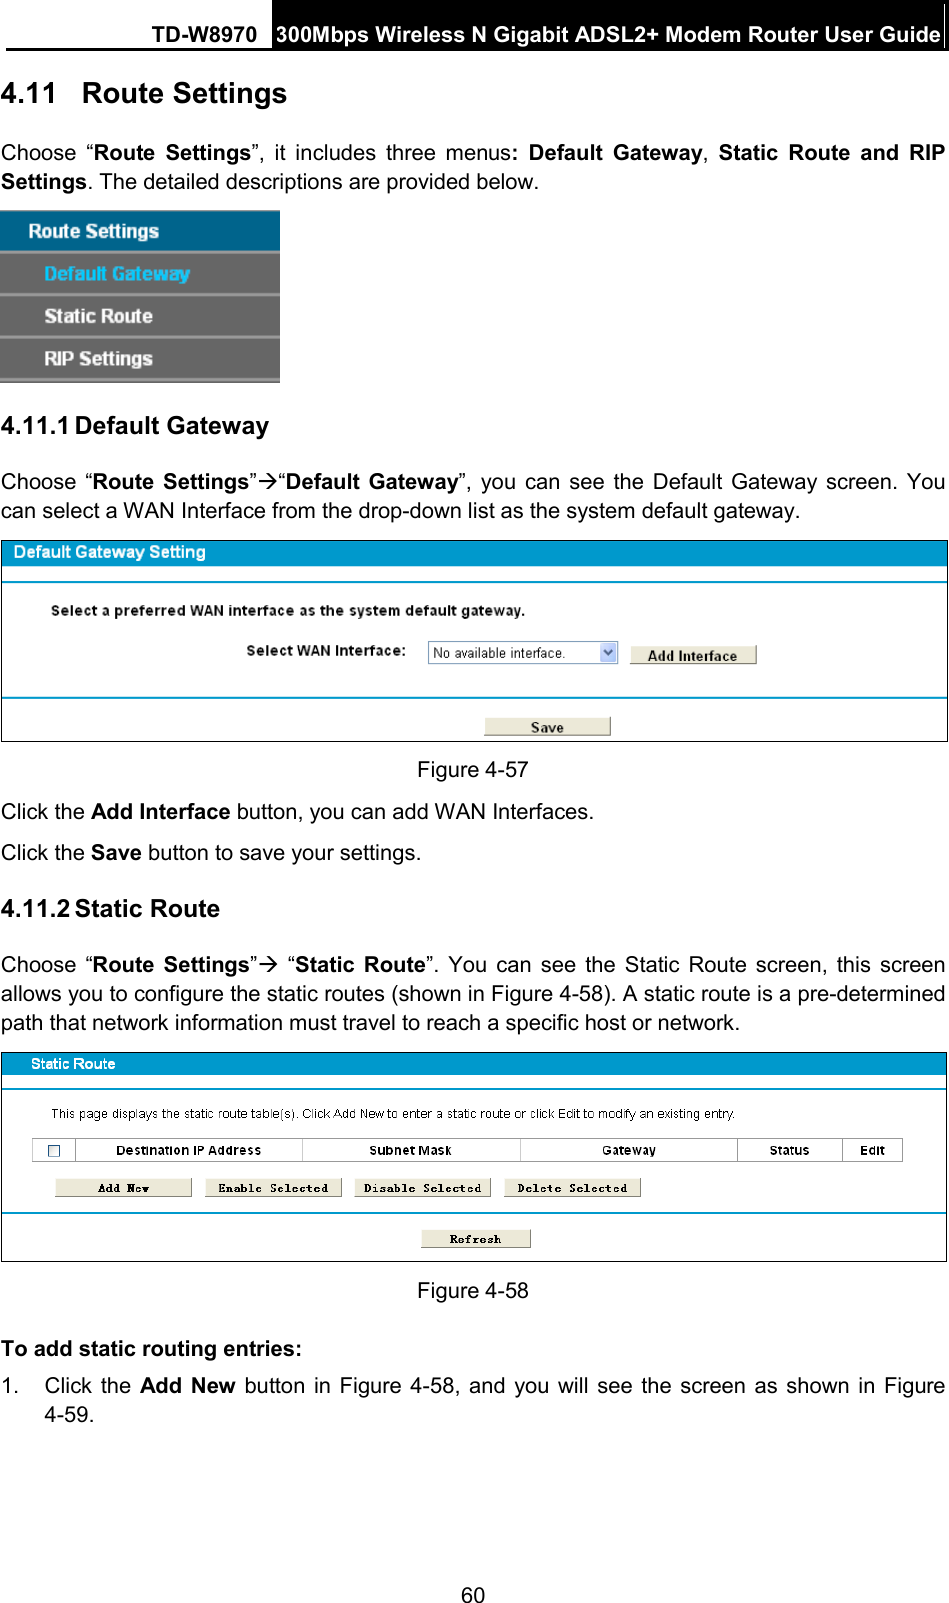 TD-W8970 300Mbps Wireless N Gigabit ADSL2+ Modem Router User Guide  4.11 Route Settings Choose “Route  Settings”, it includes three menus:  Default Gateway, Static Route and RIP Settings. The detailed descriptions are provided below.  4.11.1 Default Gateway Choose “Route  Settings”“Default Gateway”, you can see the Default Gateway screen.  You can select a WAN Interface from the drop-down list as the system default gateway.    Figure 4-57 Click the Add Interface button, you can add WAN Interfaces. Click the Save button to save your settings. 4.11.2 Static Route Choose “Route  Settings”  “Static Route”.  You can see the Static Route screen, this screen allows you to configure the static routes (shown in Figure 4-58). A static route is a pre-determined path that network information must travel to reach a specific host or network.  Figure 4-58 To add static routing entries: 1. Click the Add New button in Figure 4-58, and you will see the screen as shown in Figure 4-59.   60 